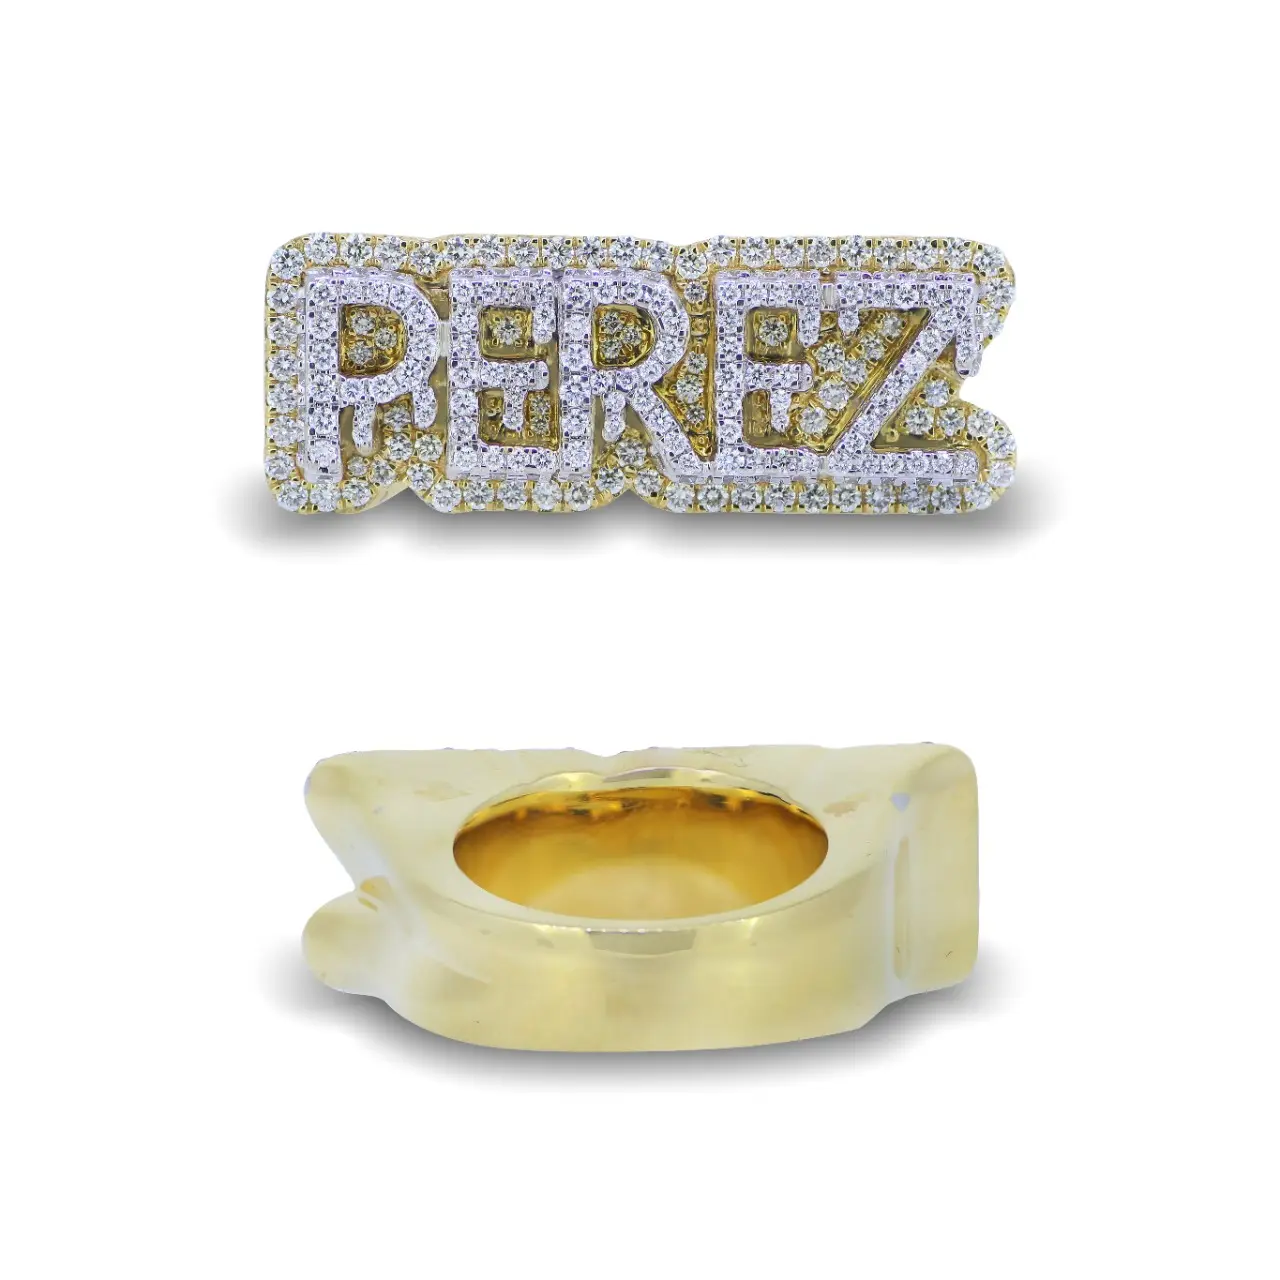 Customised trendy name ring 18k Yellow/White gold - 30 grams of gold weight with 1.93 carats of diamond weight